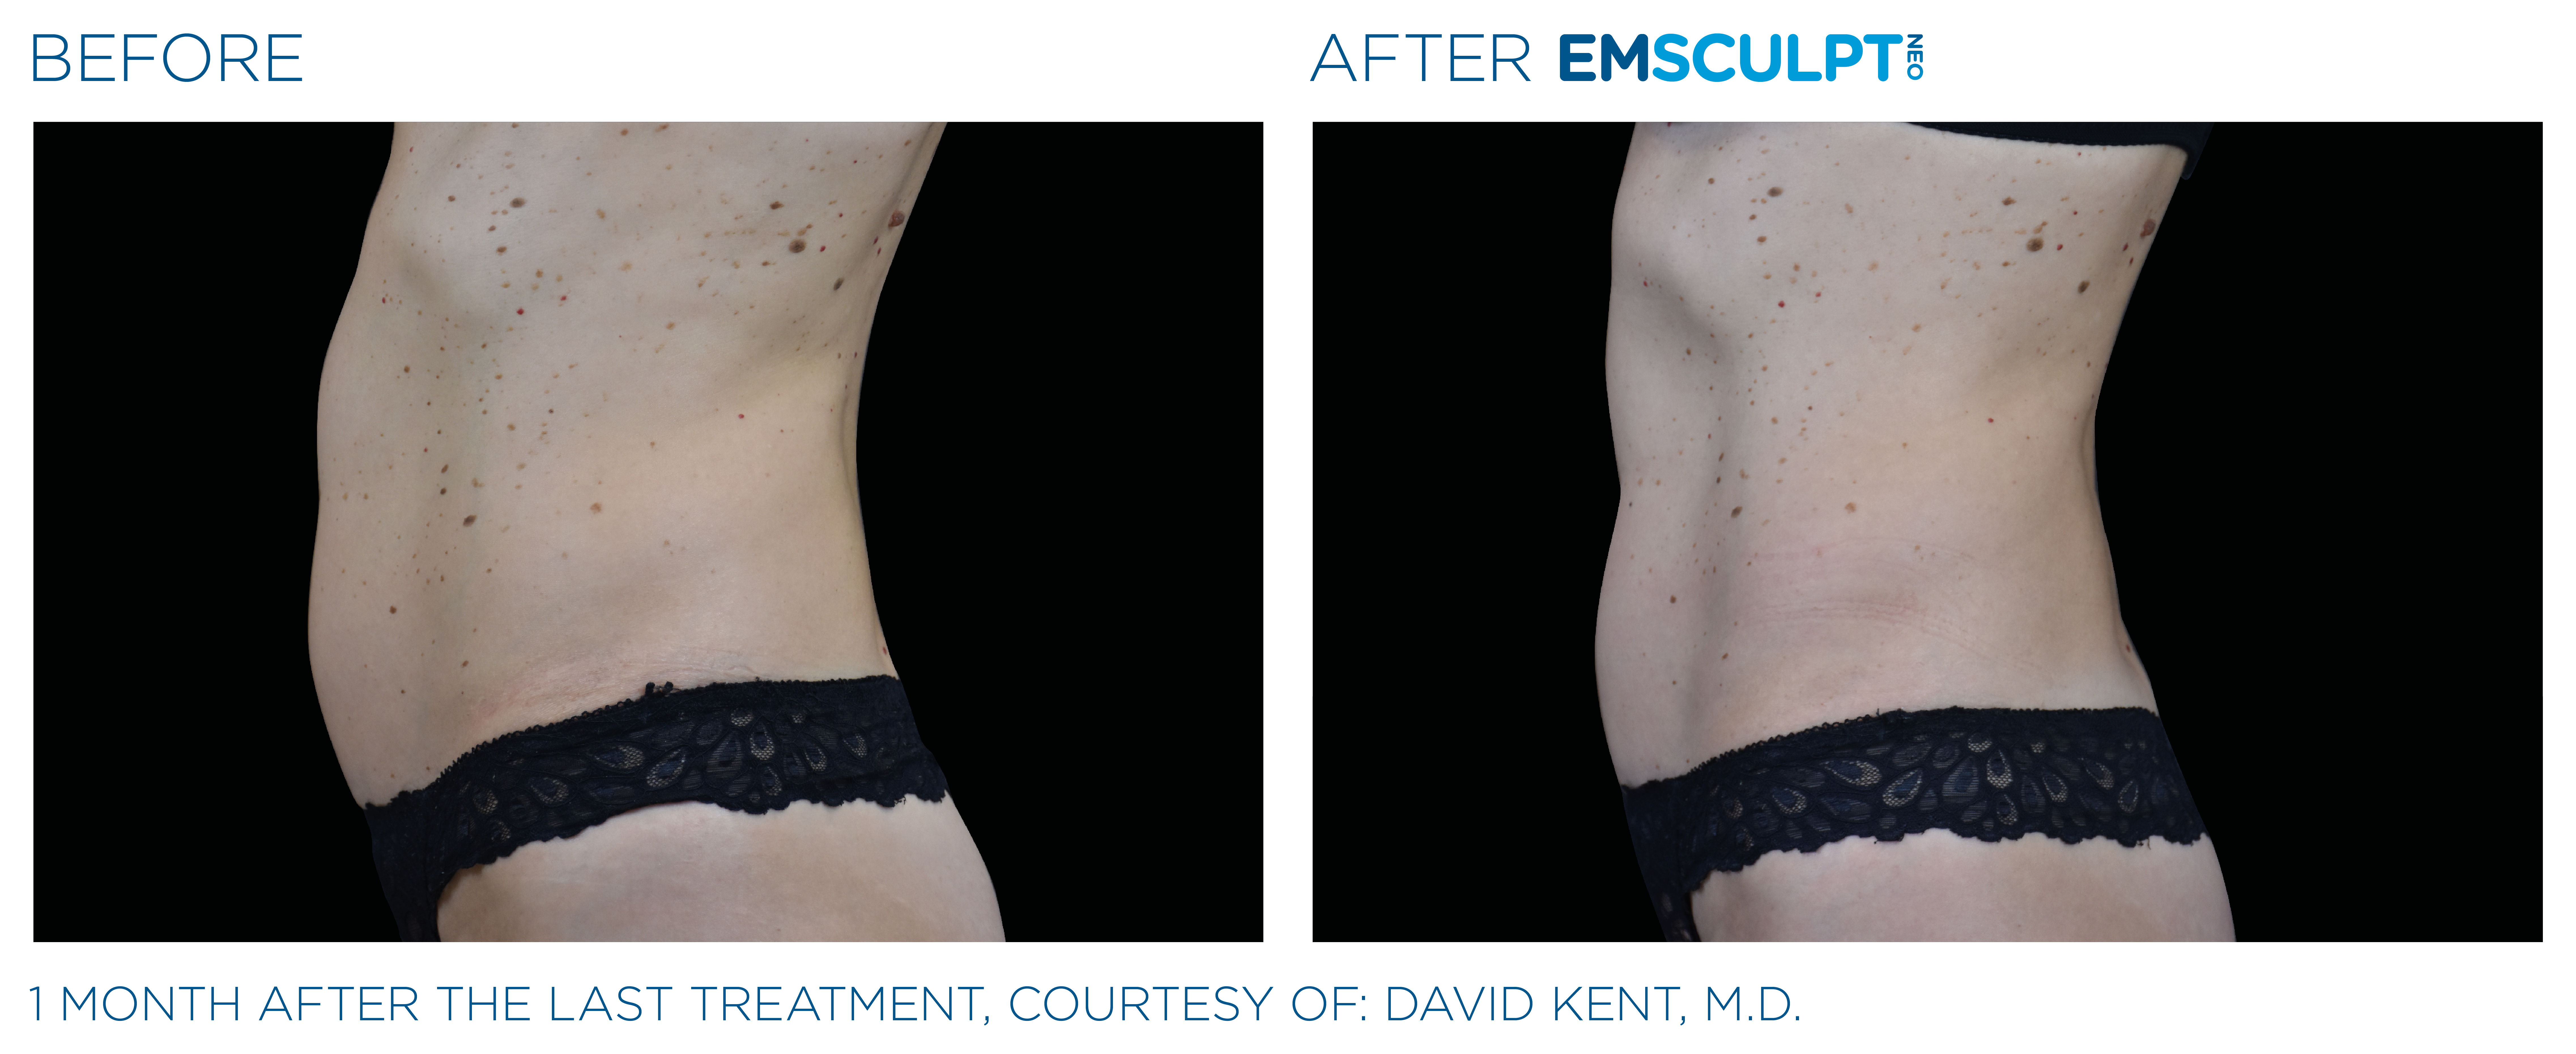 EmSculpt NEO Before and After Female Abdomen